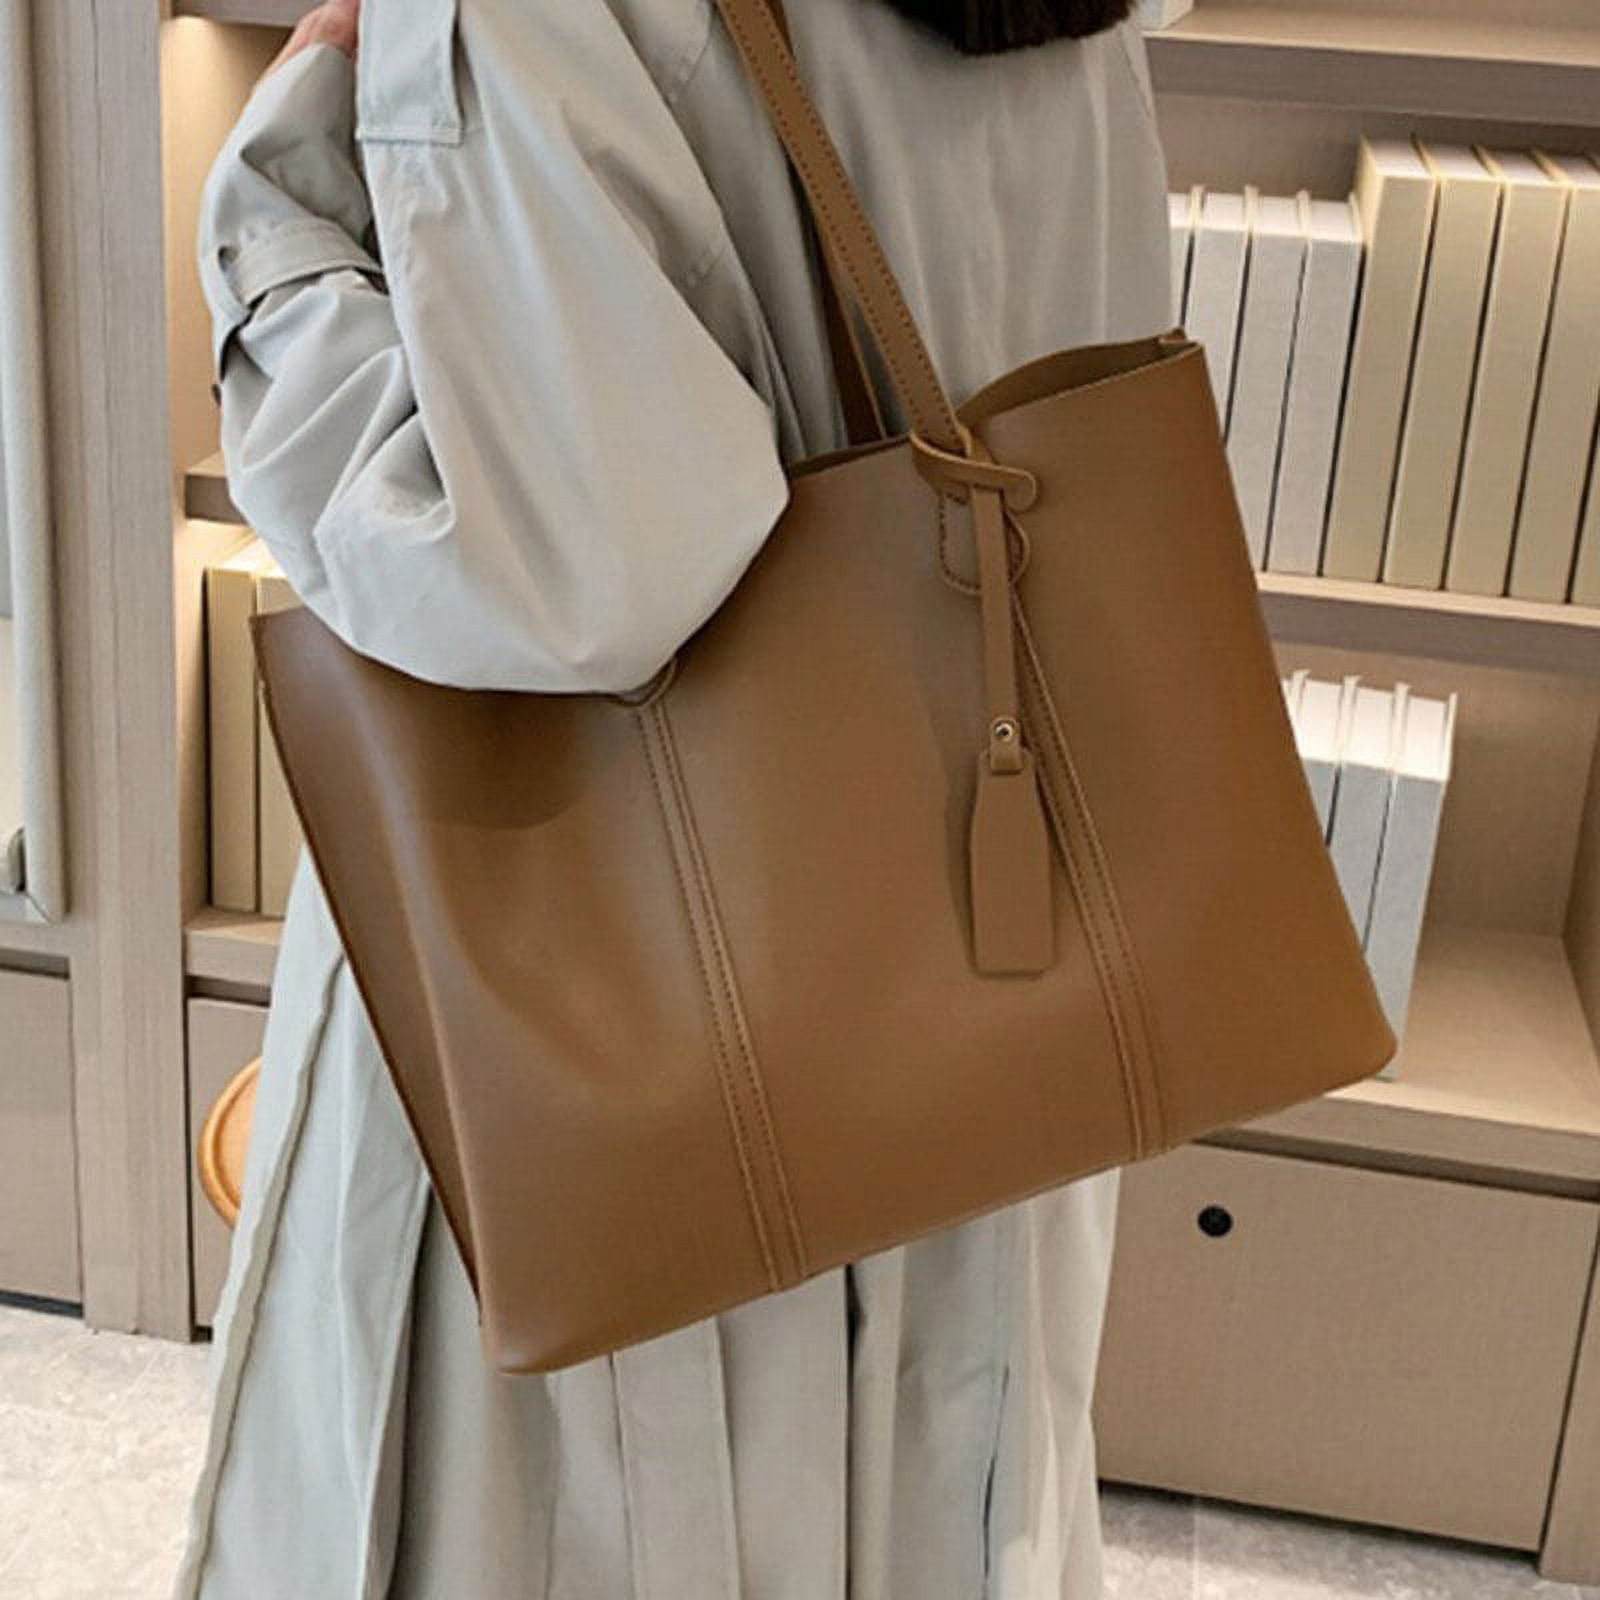 Cocopeaunts Female New Stylish Tote Bag Quality Soft Leather Shoulder Bag Trend All Match Handbags Women Luxury Cherry Pendant Shopping Bag, Adult